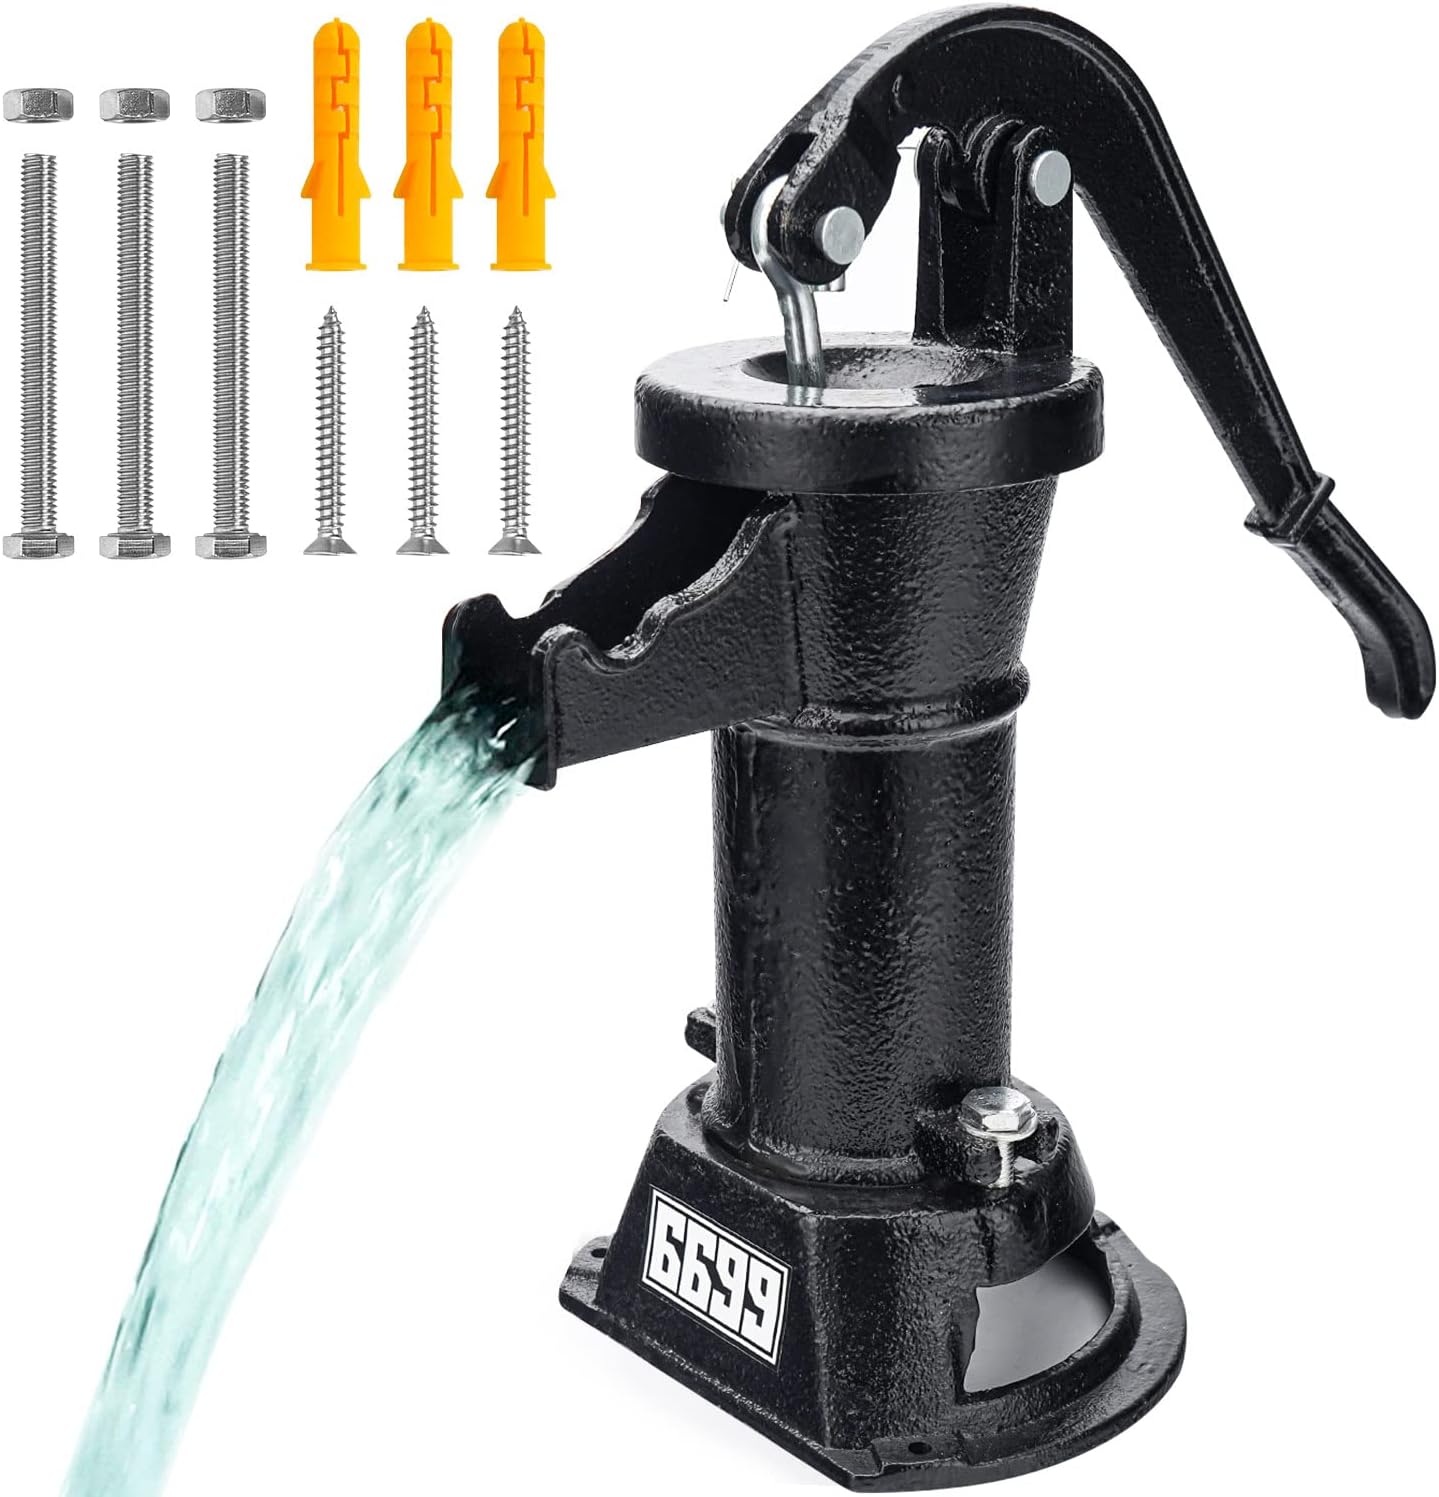 6699 Durable Cast Iron Pitcher Pump Antique Manual Hand Shake Suction Well Pump Water Transfer Pump 25ft Maximum Lift Easy Installation for Outdoor Garden Pond Backyards SWP 300 Black